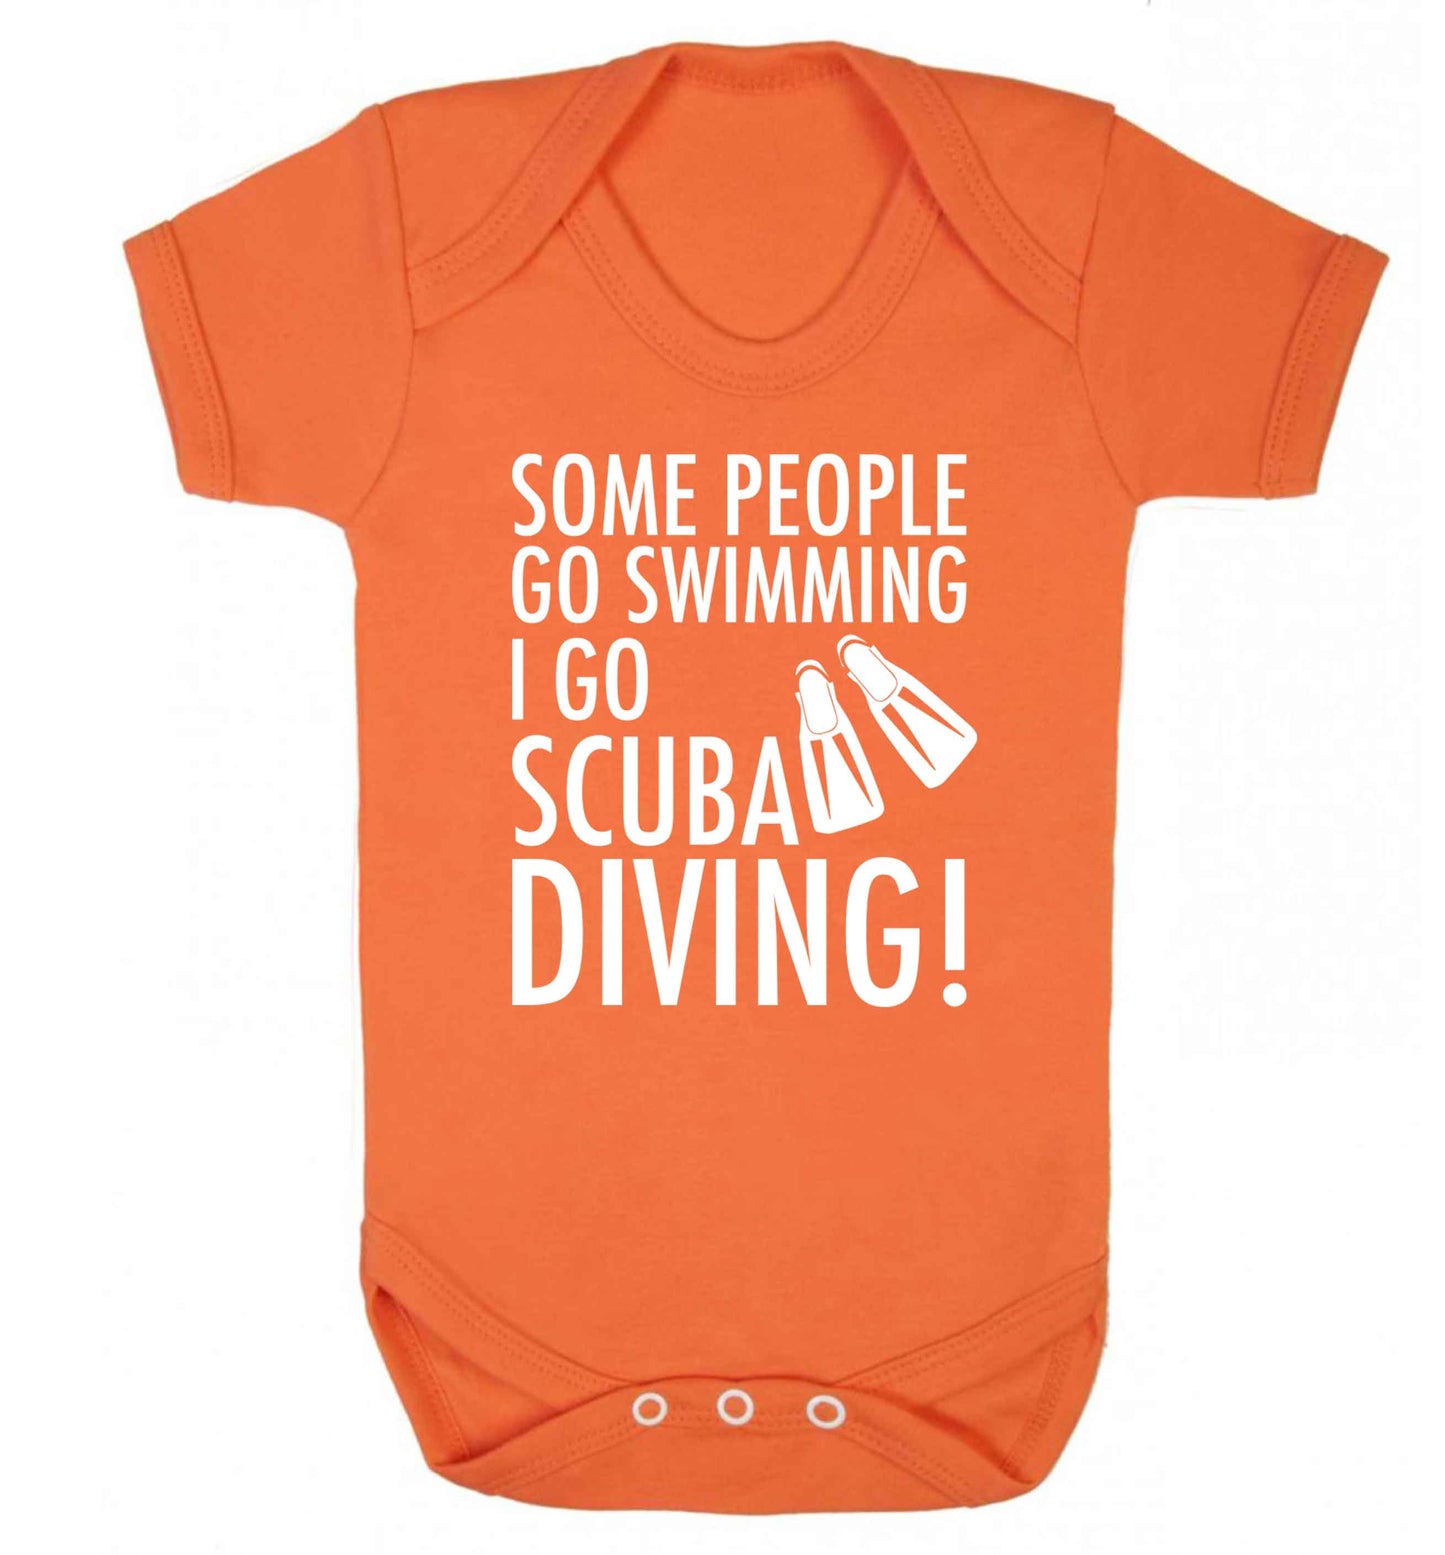 Some people go swimming I go scuba diving! Baby Vest orange 18-24 months